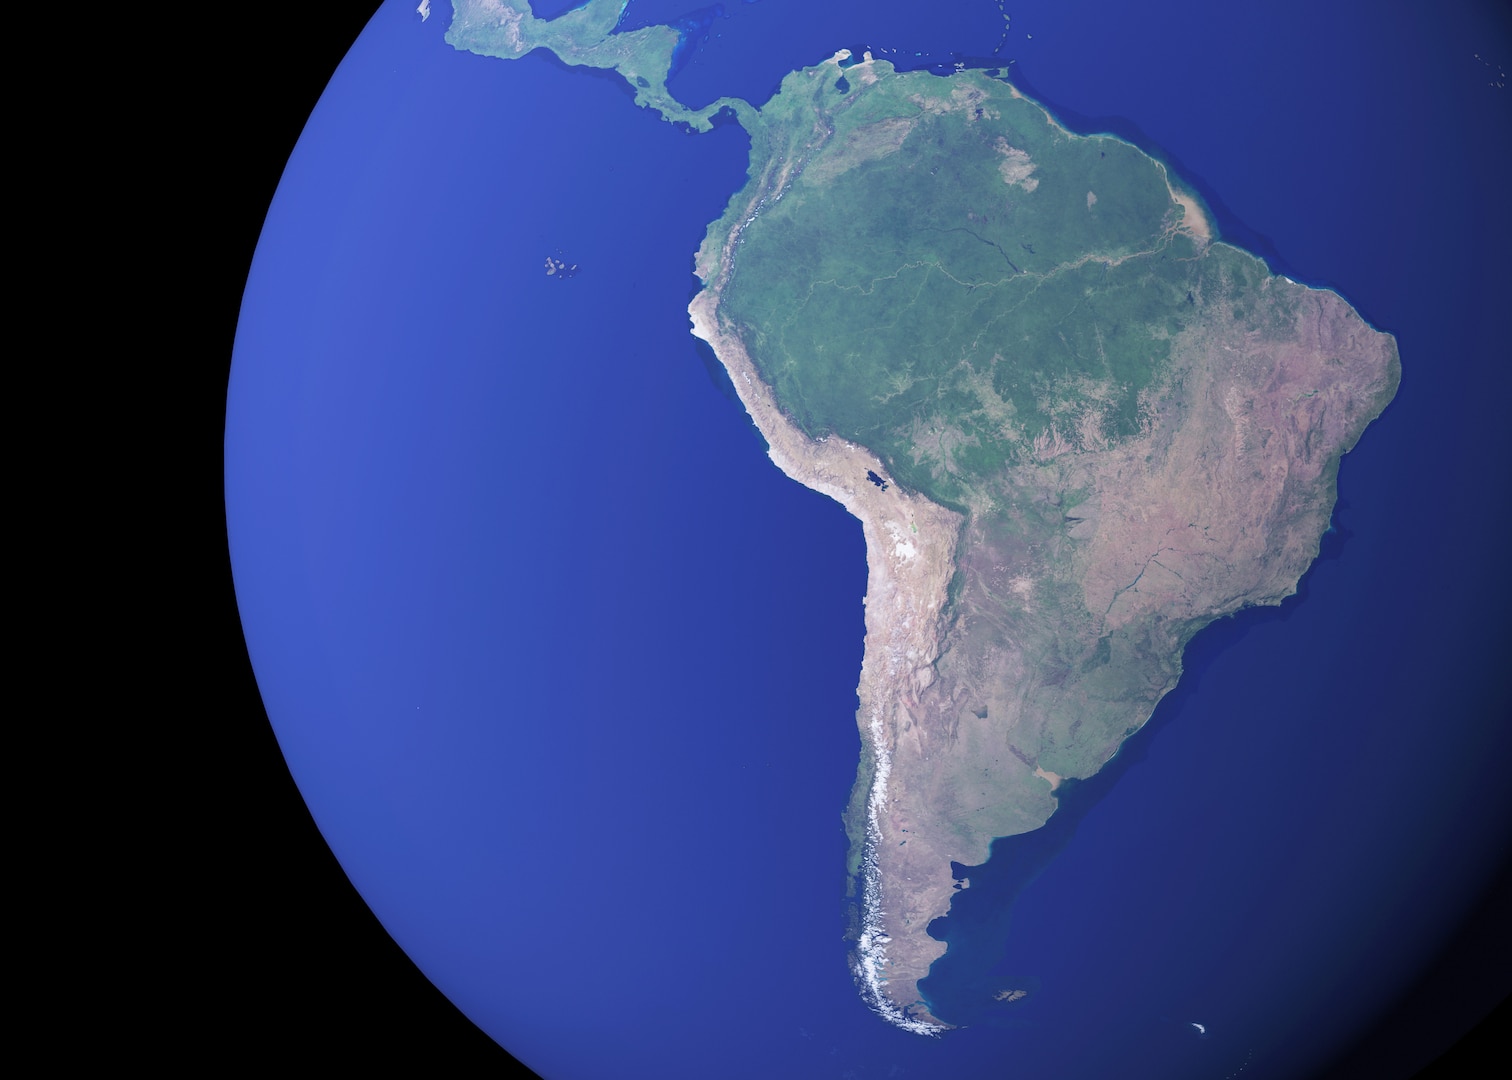 A satellite image shows South America.